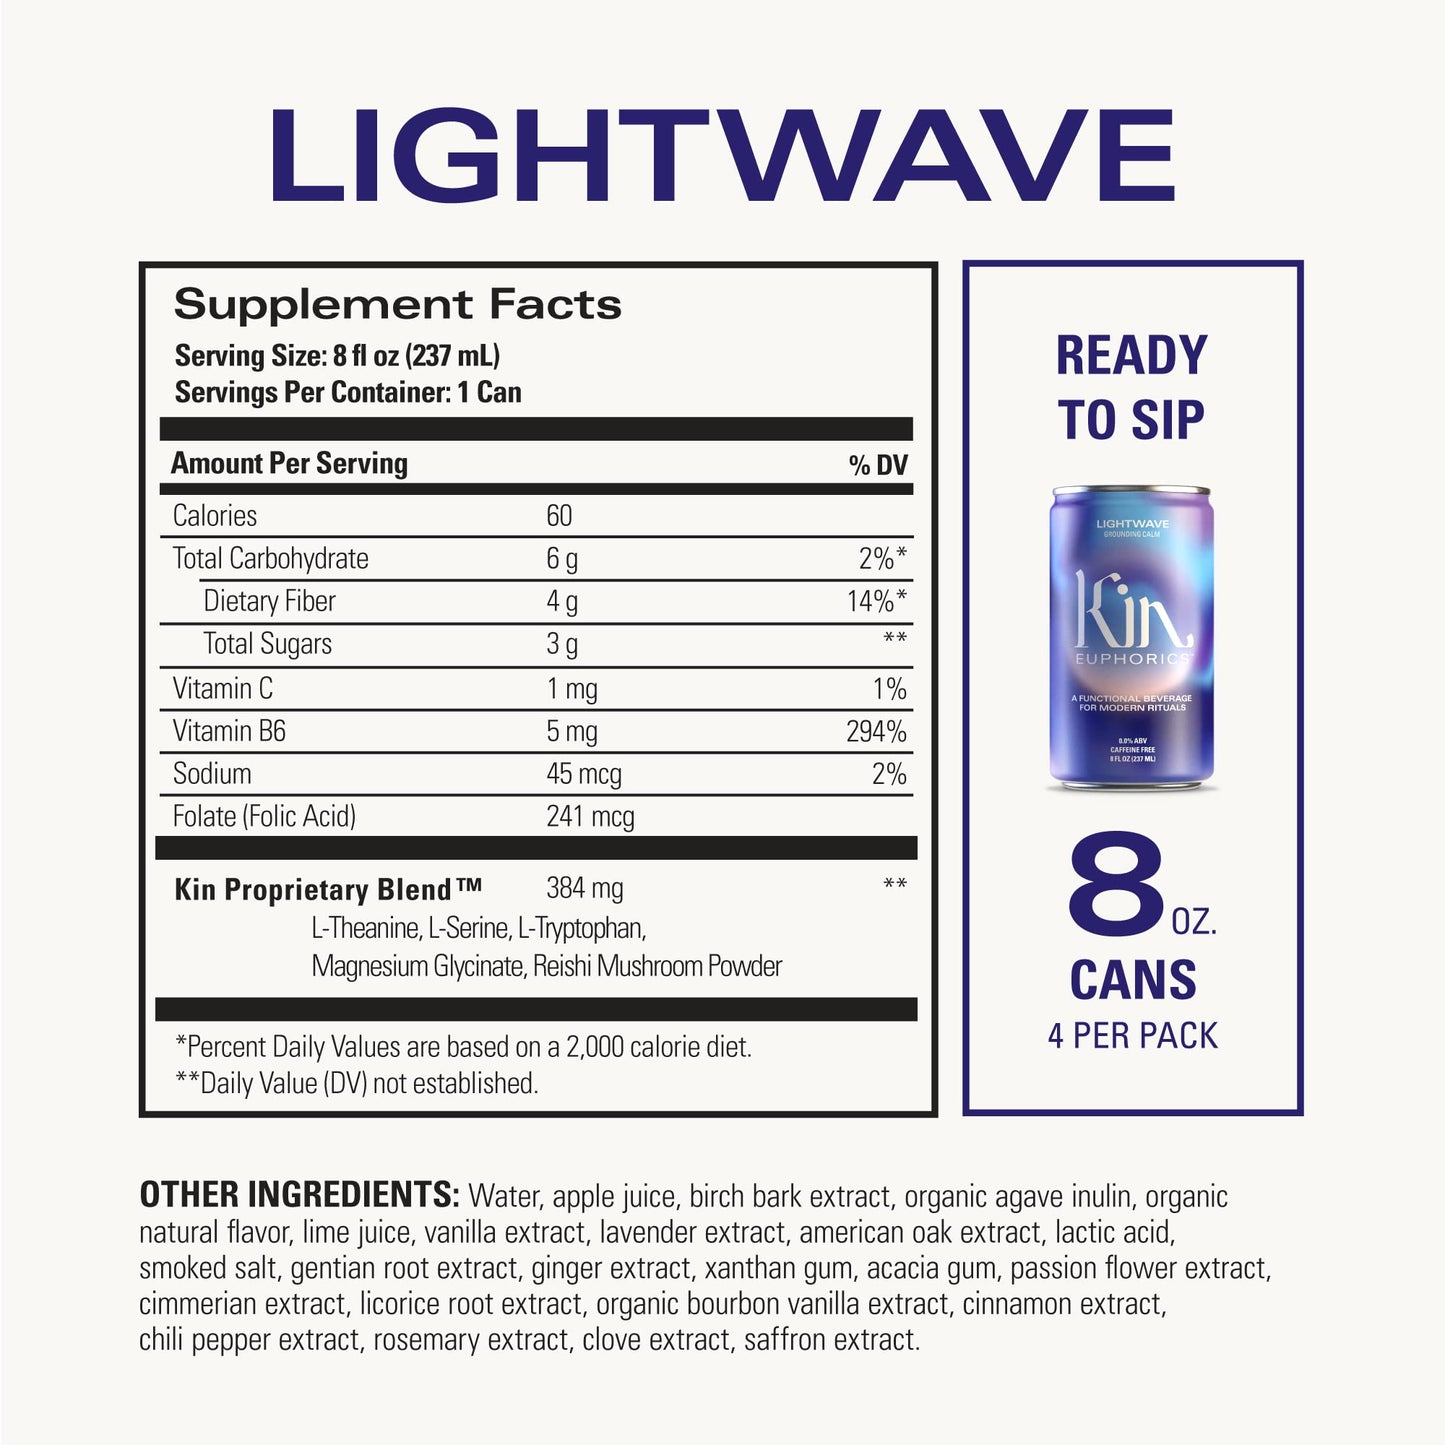 Lightwave by Kin Euphorics, Non Alcoholic Spirits, Ready to Drink, Nootropic, Botanic, Adaptogen Drink, Lavender-Vanilla, Ginger, and Birch, Calm the Mind and Mellow the Mood, 8 Fl Oz (4pk)